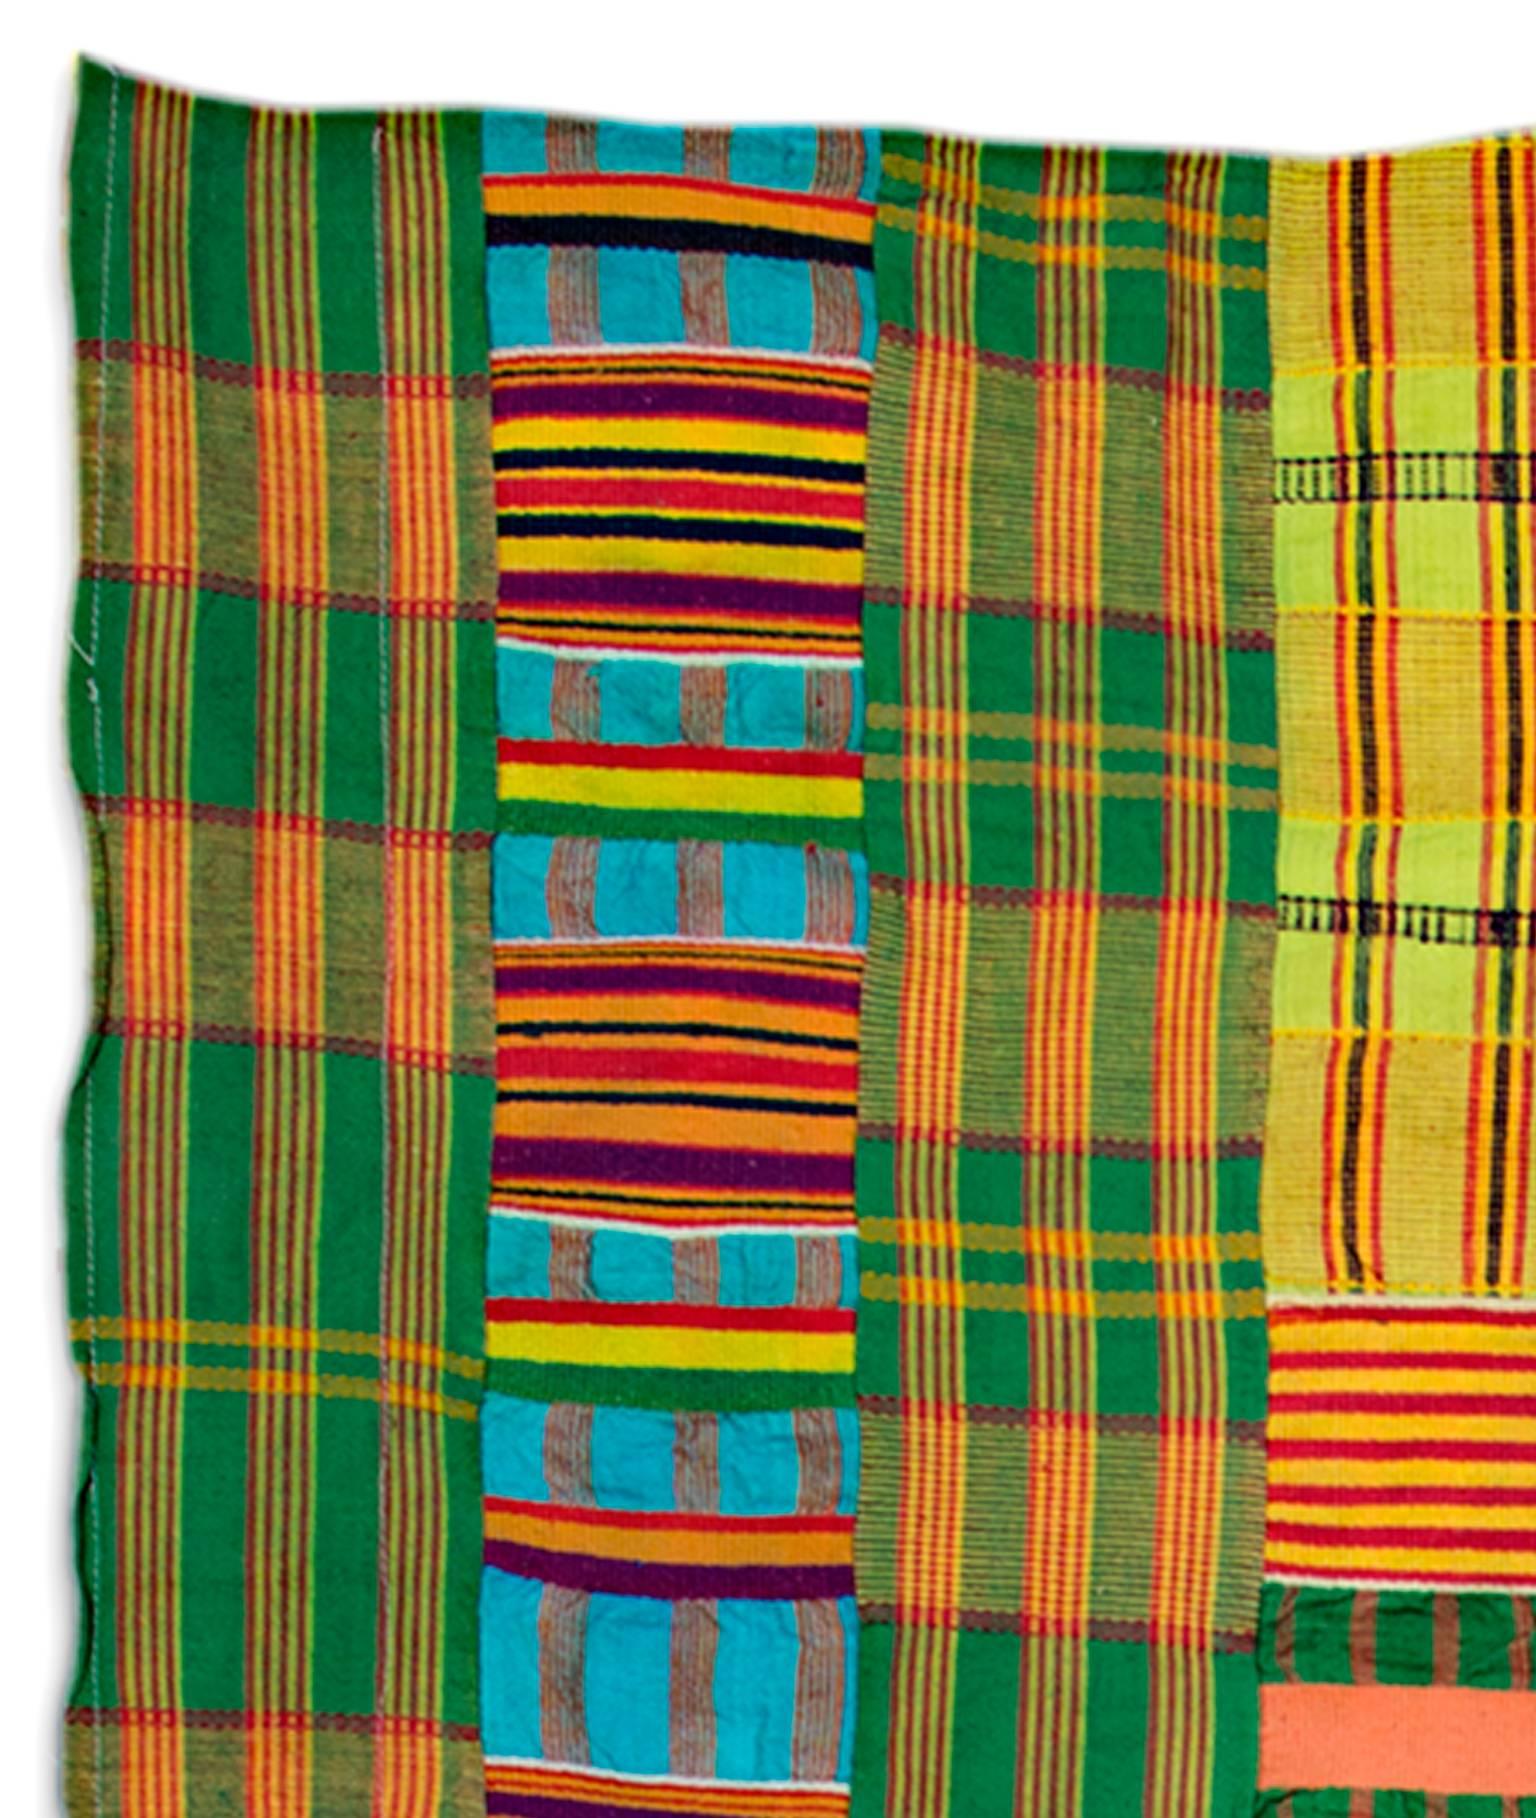 This cotton fabric was made by an unknown Ewe artist. The Ewe people are an African ethnic group. This may be an example of Kente, a type of silk and cotton fabric made of interwoven cloth strips and is native to the Akan ethnic group of South